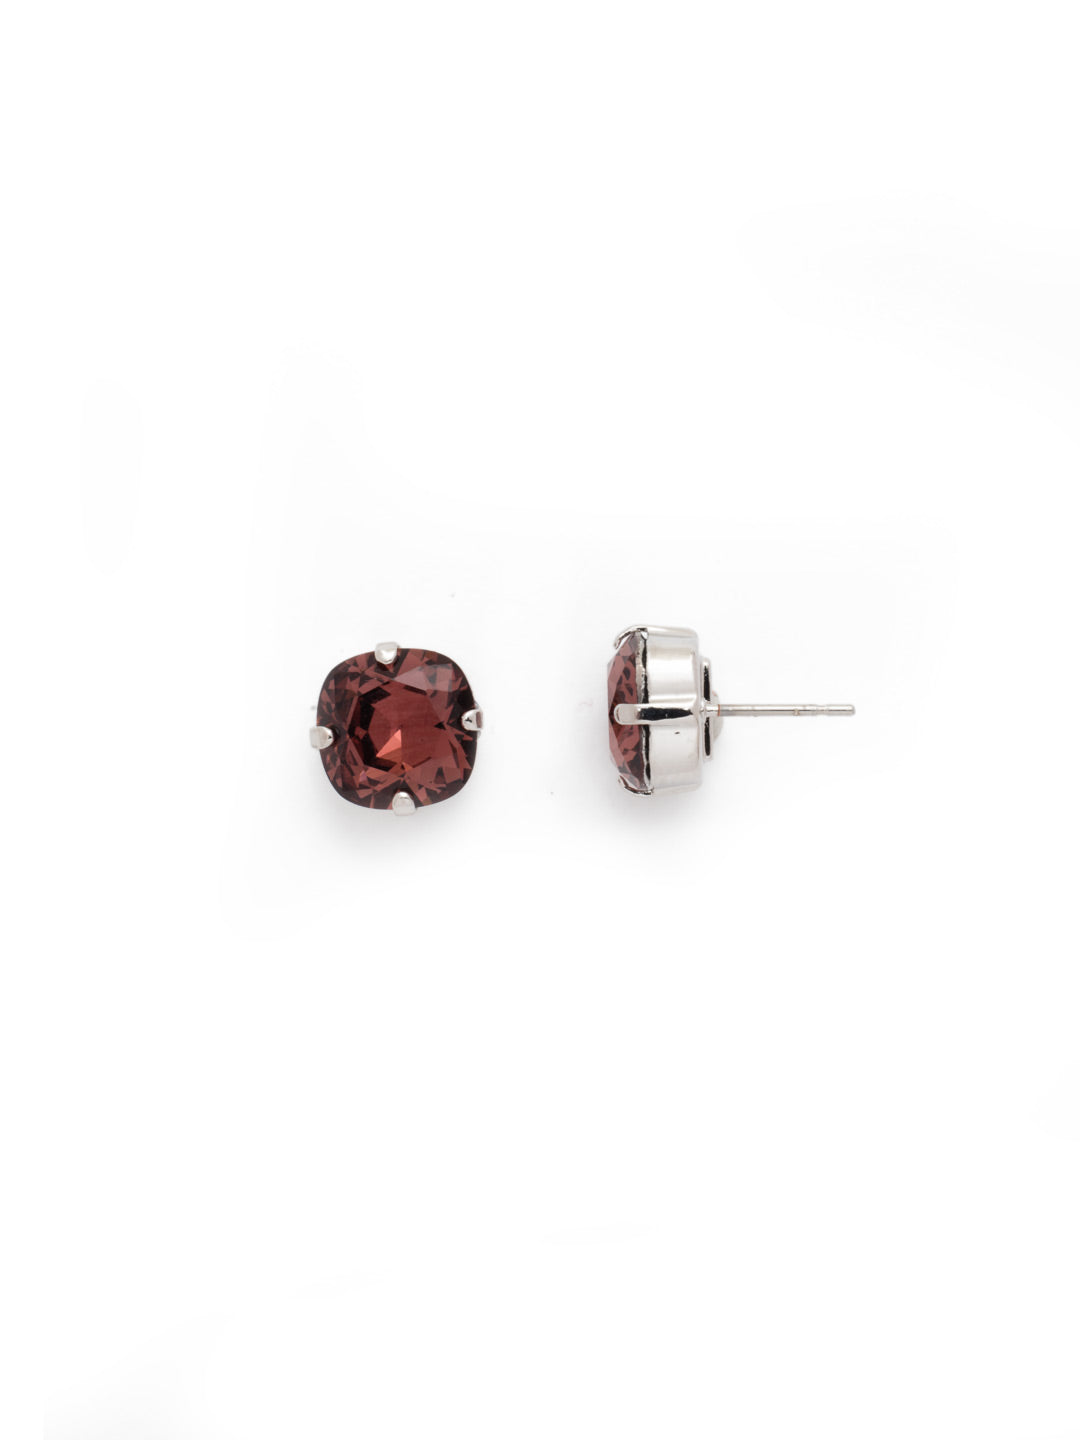 Halcyon Stud Earrings - EDH25RHBUR - <p>A beautiful, luminous cushion-cut crystal in a classic four-pronged setting that's ideal for everyday wear. From Sorrelli's Burgundy collection in our Palladium Silver-tone finish.</p>